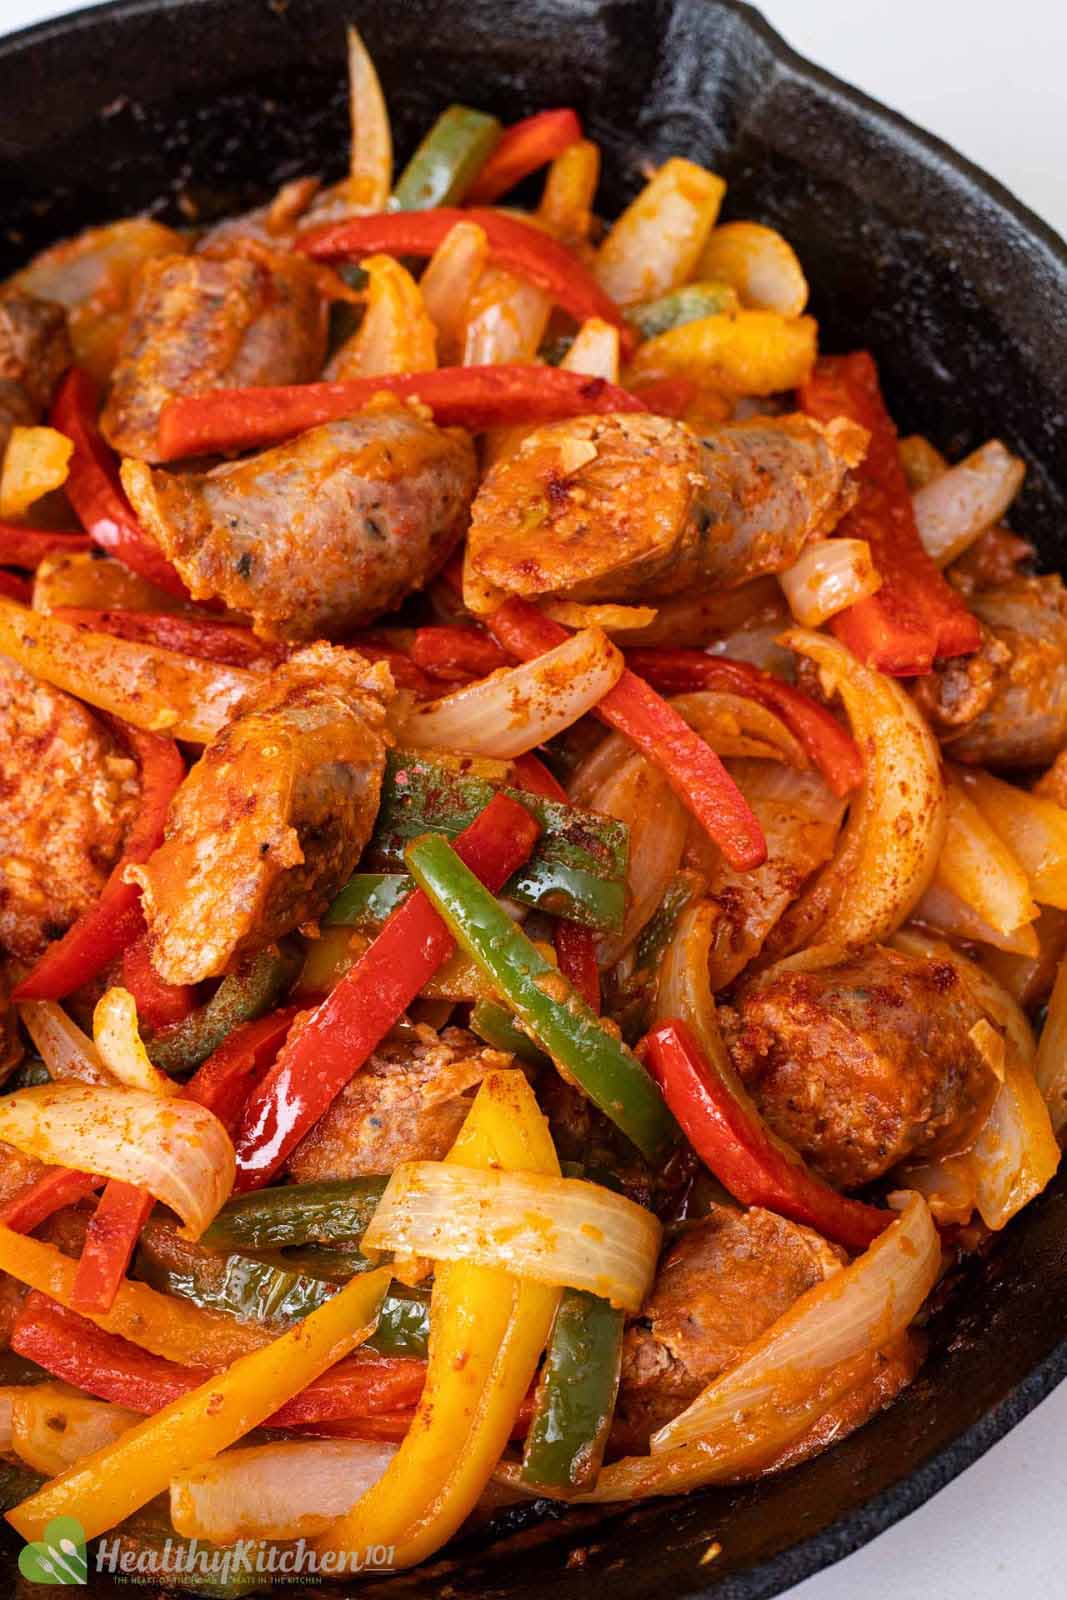 Italian Sausage and Peppers Recipe - Easy Dinner in Less Than 1 Hour